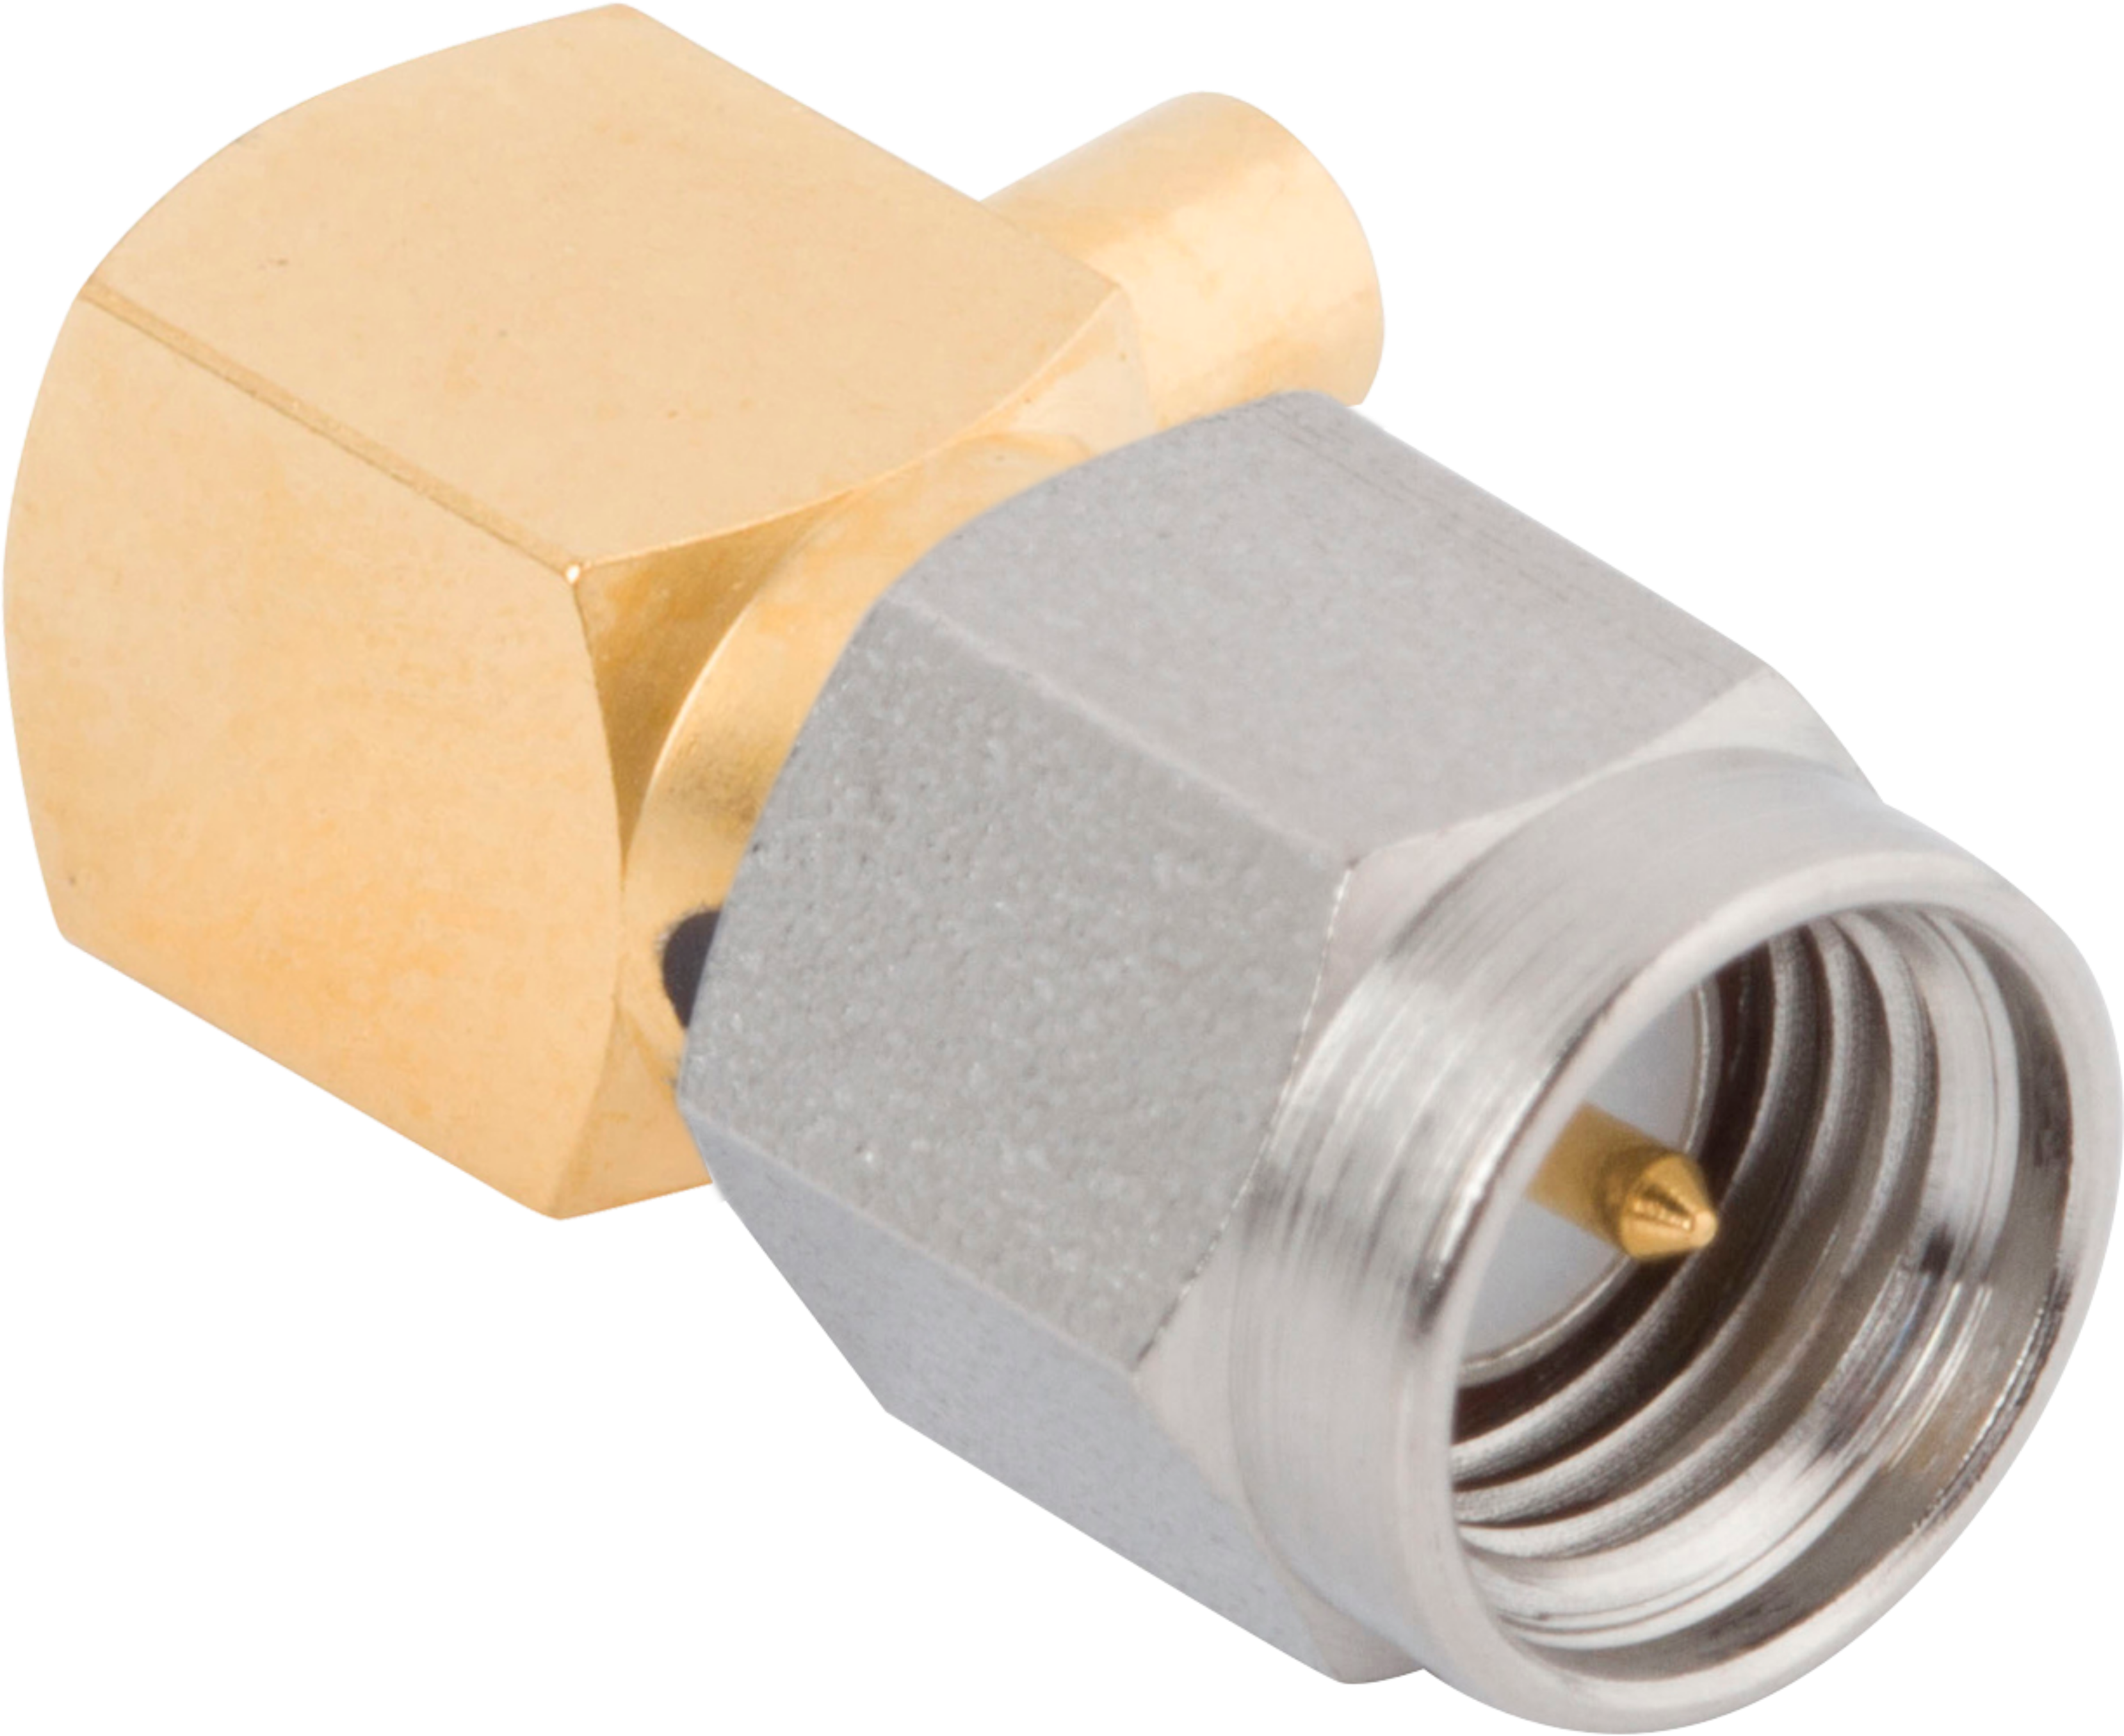 SMA Male Connector, R/A for RG-174 Cable, M39012/56-3107